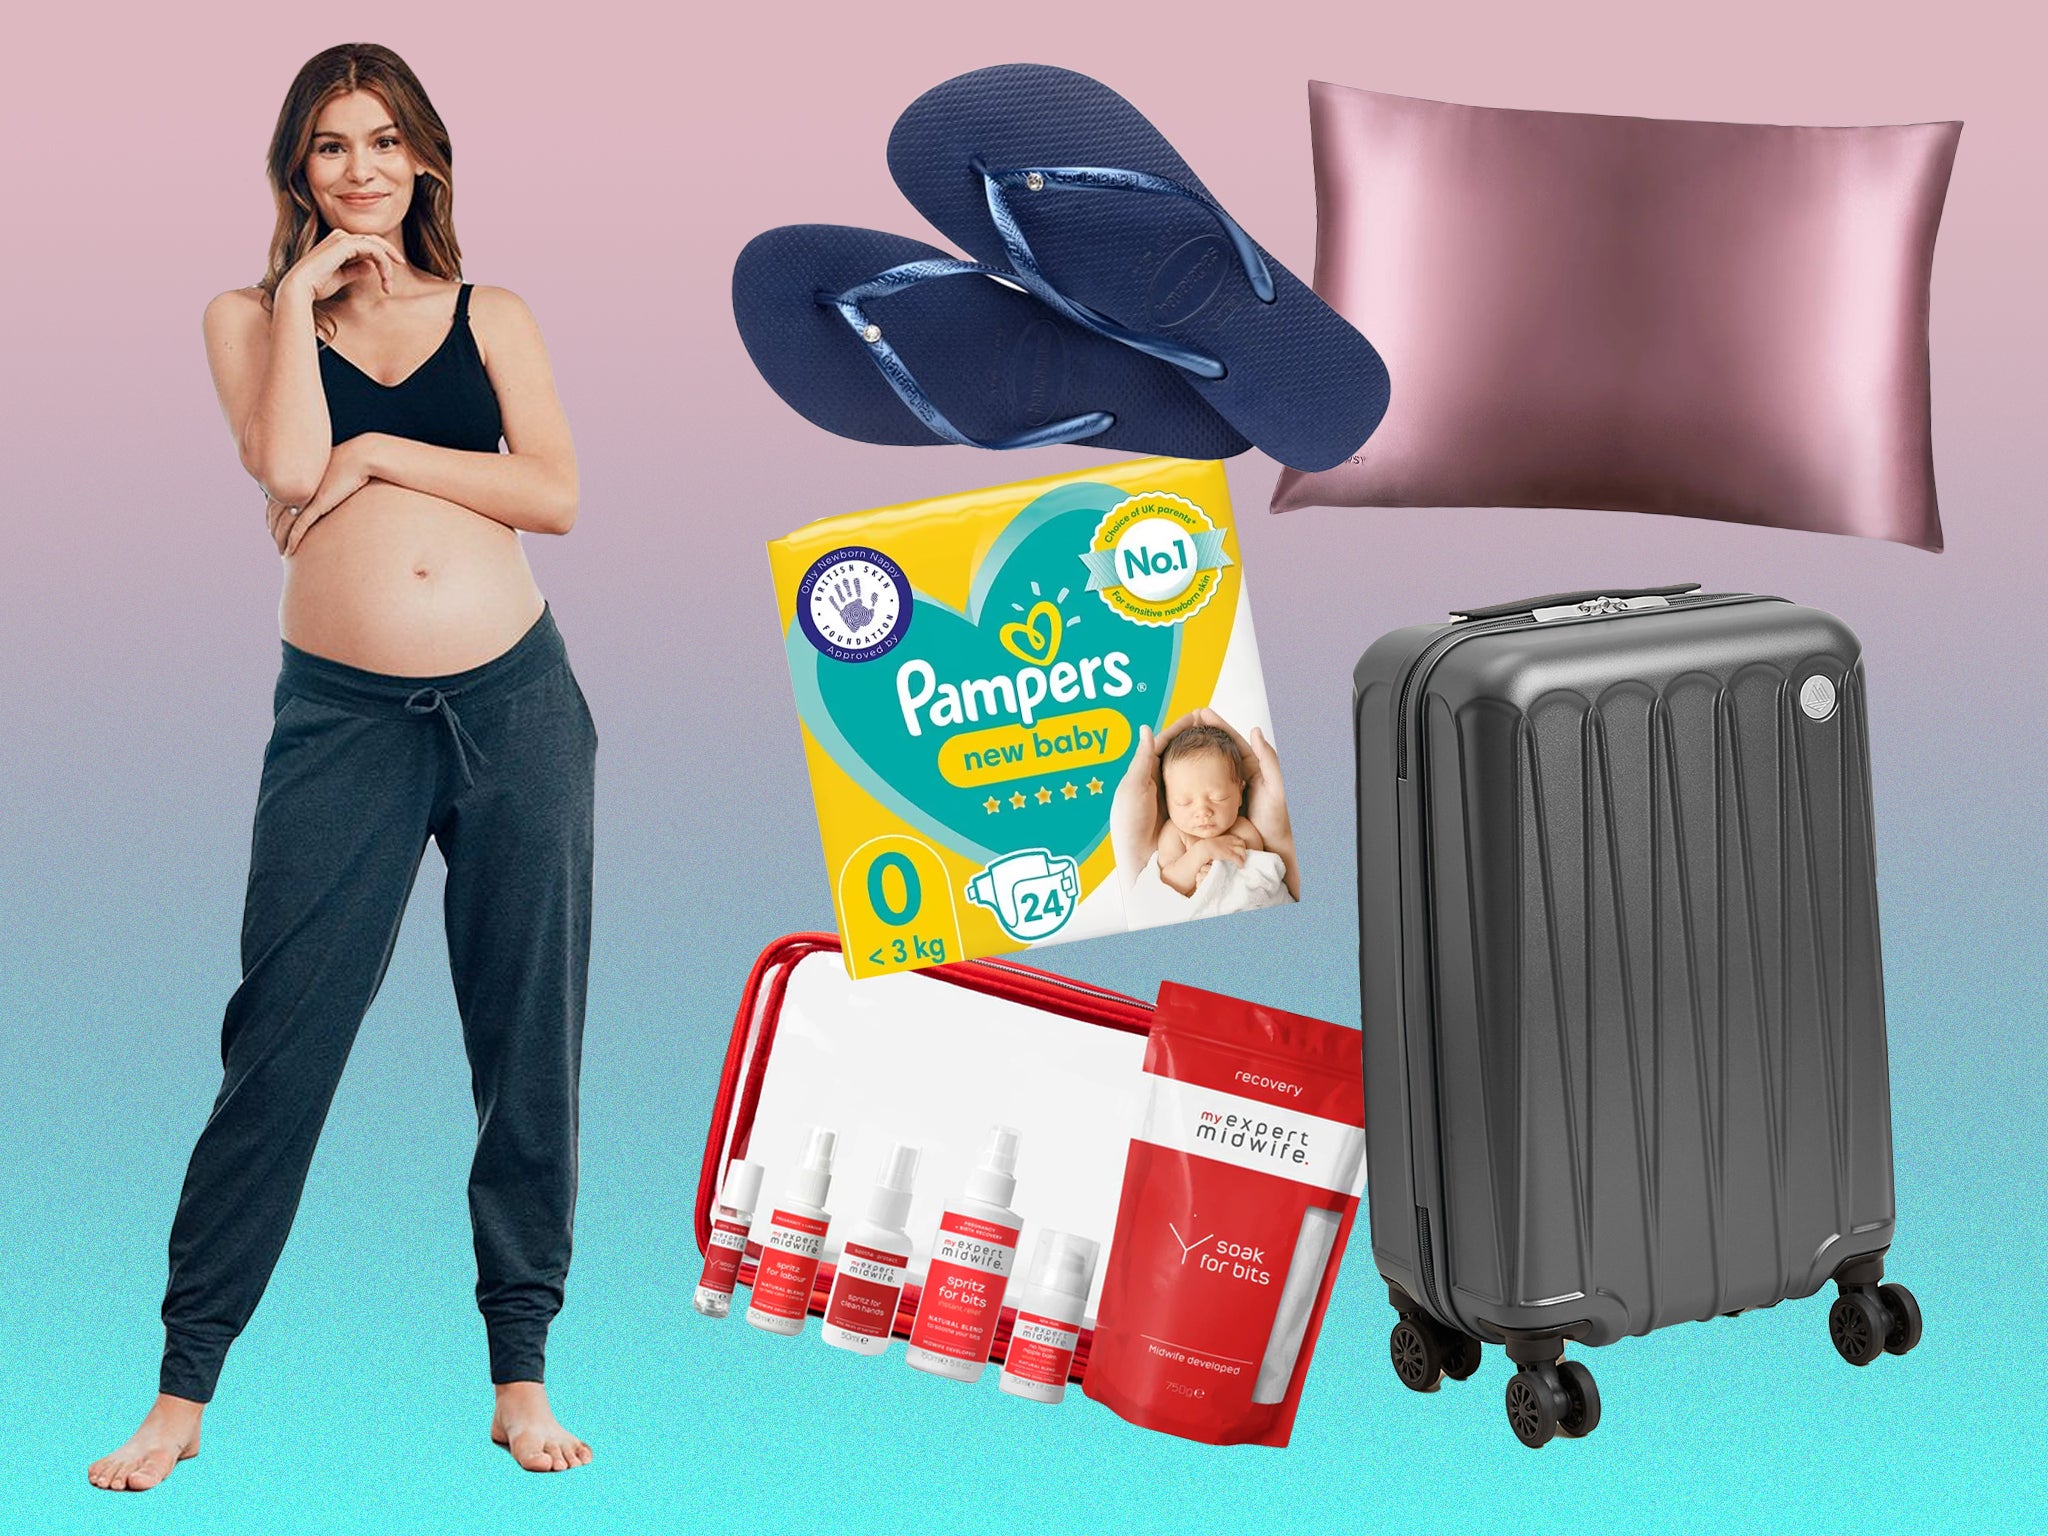 Hospital bag checklist: What essentials and luxuries should I pack for giving birth?